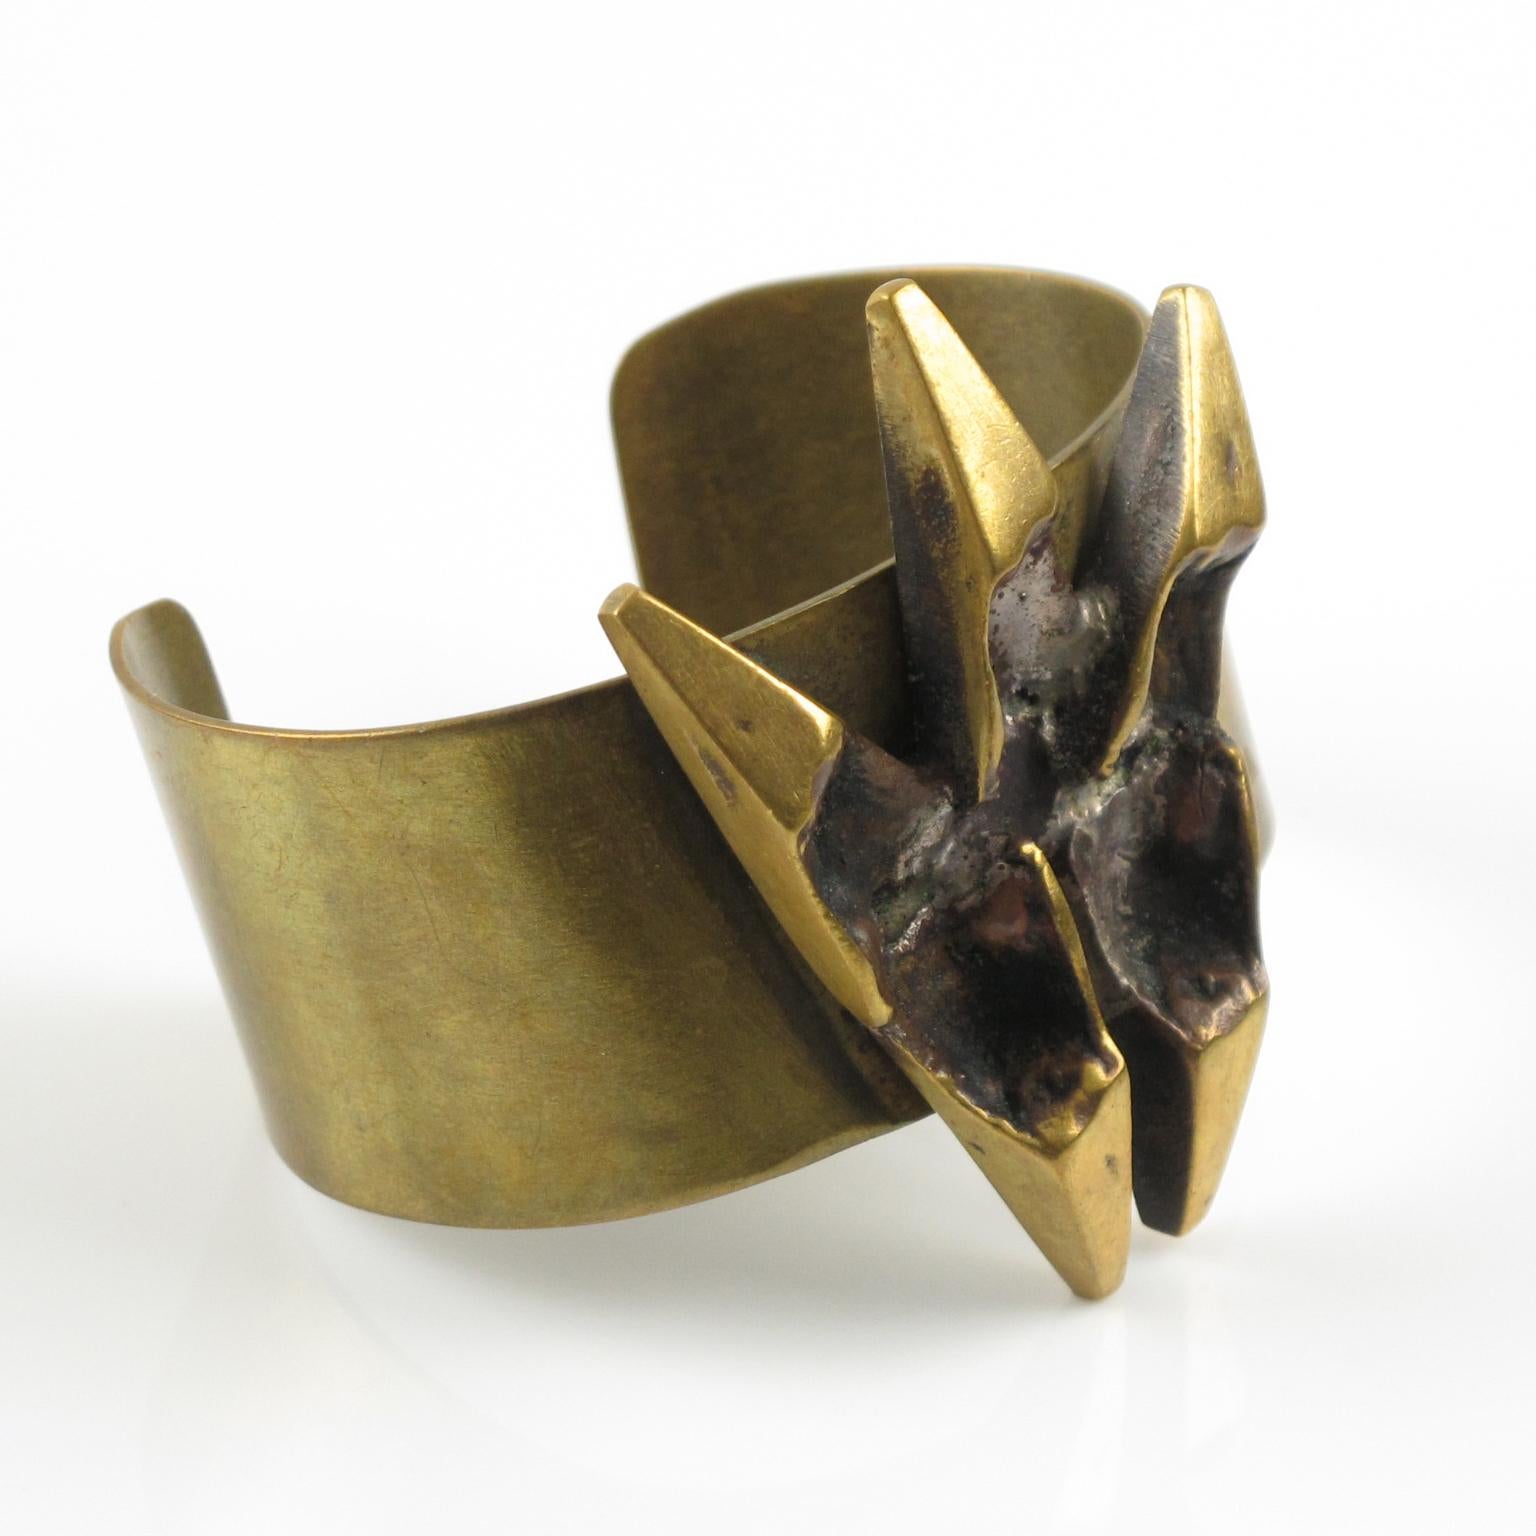 Impressive sculptural brutalist bronze cuff bracelet by French sculptor and painter, Henri Nogaret (1927 -). The large bronze band is topped with a modernist abstract sculpture ornament. Signature engraved on the side.
Please check our storefront,